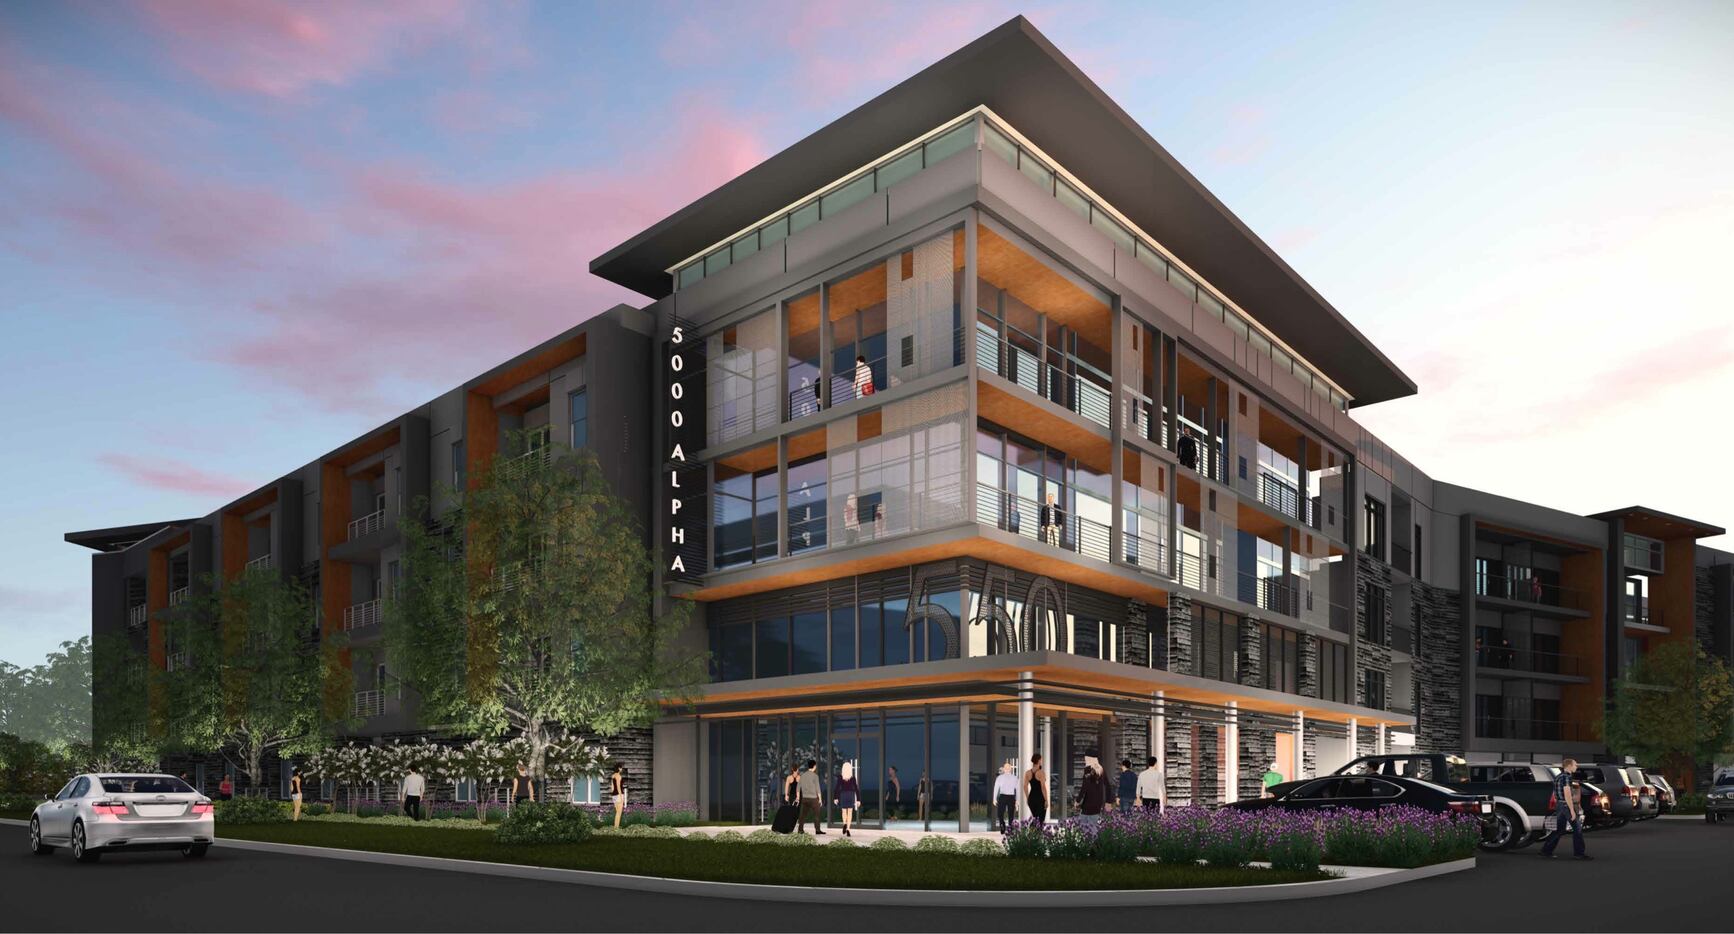 Apartment builder JPI would build more than 400 apartments in the project.